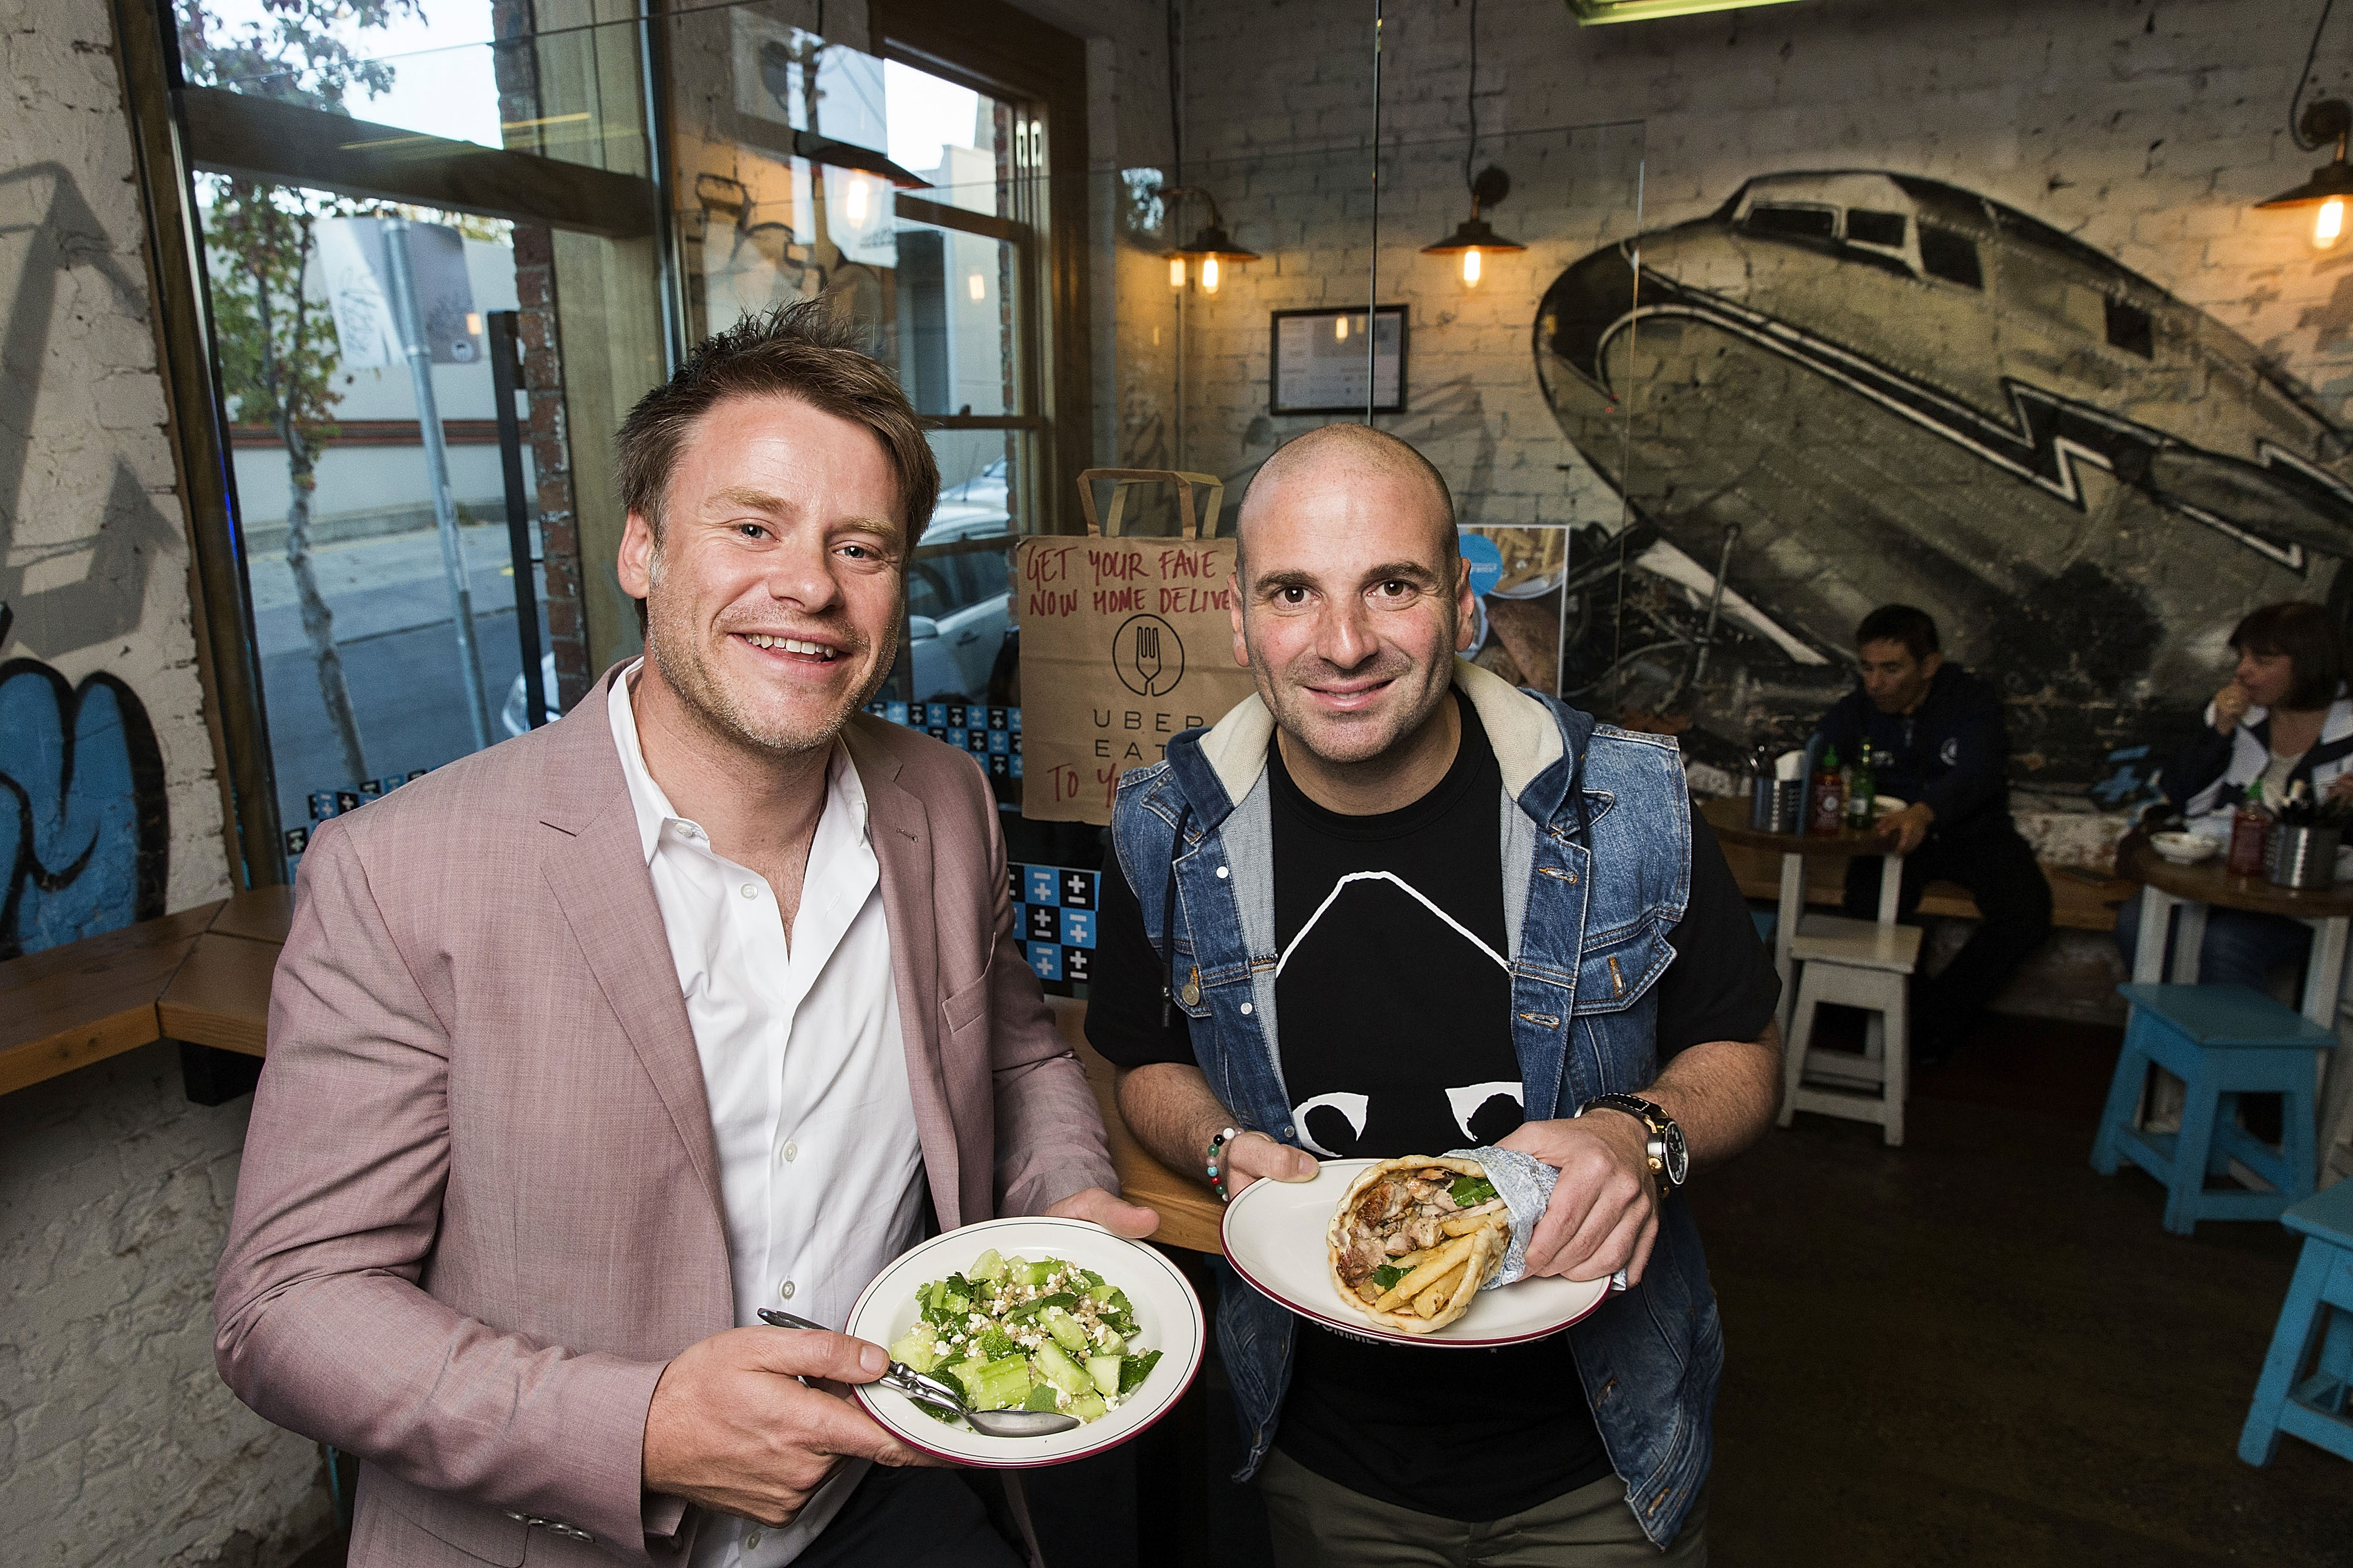 Radek Sali and George Calombaris pose for a photo at Jimmy Grant's in Fitzroy on May 15, 2016 in Melbourne, Australia